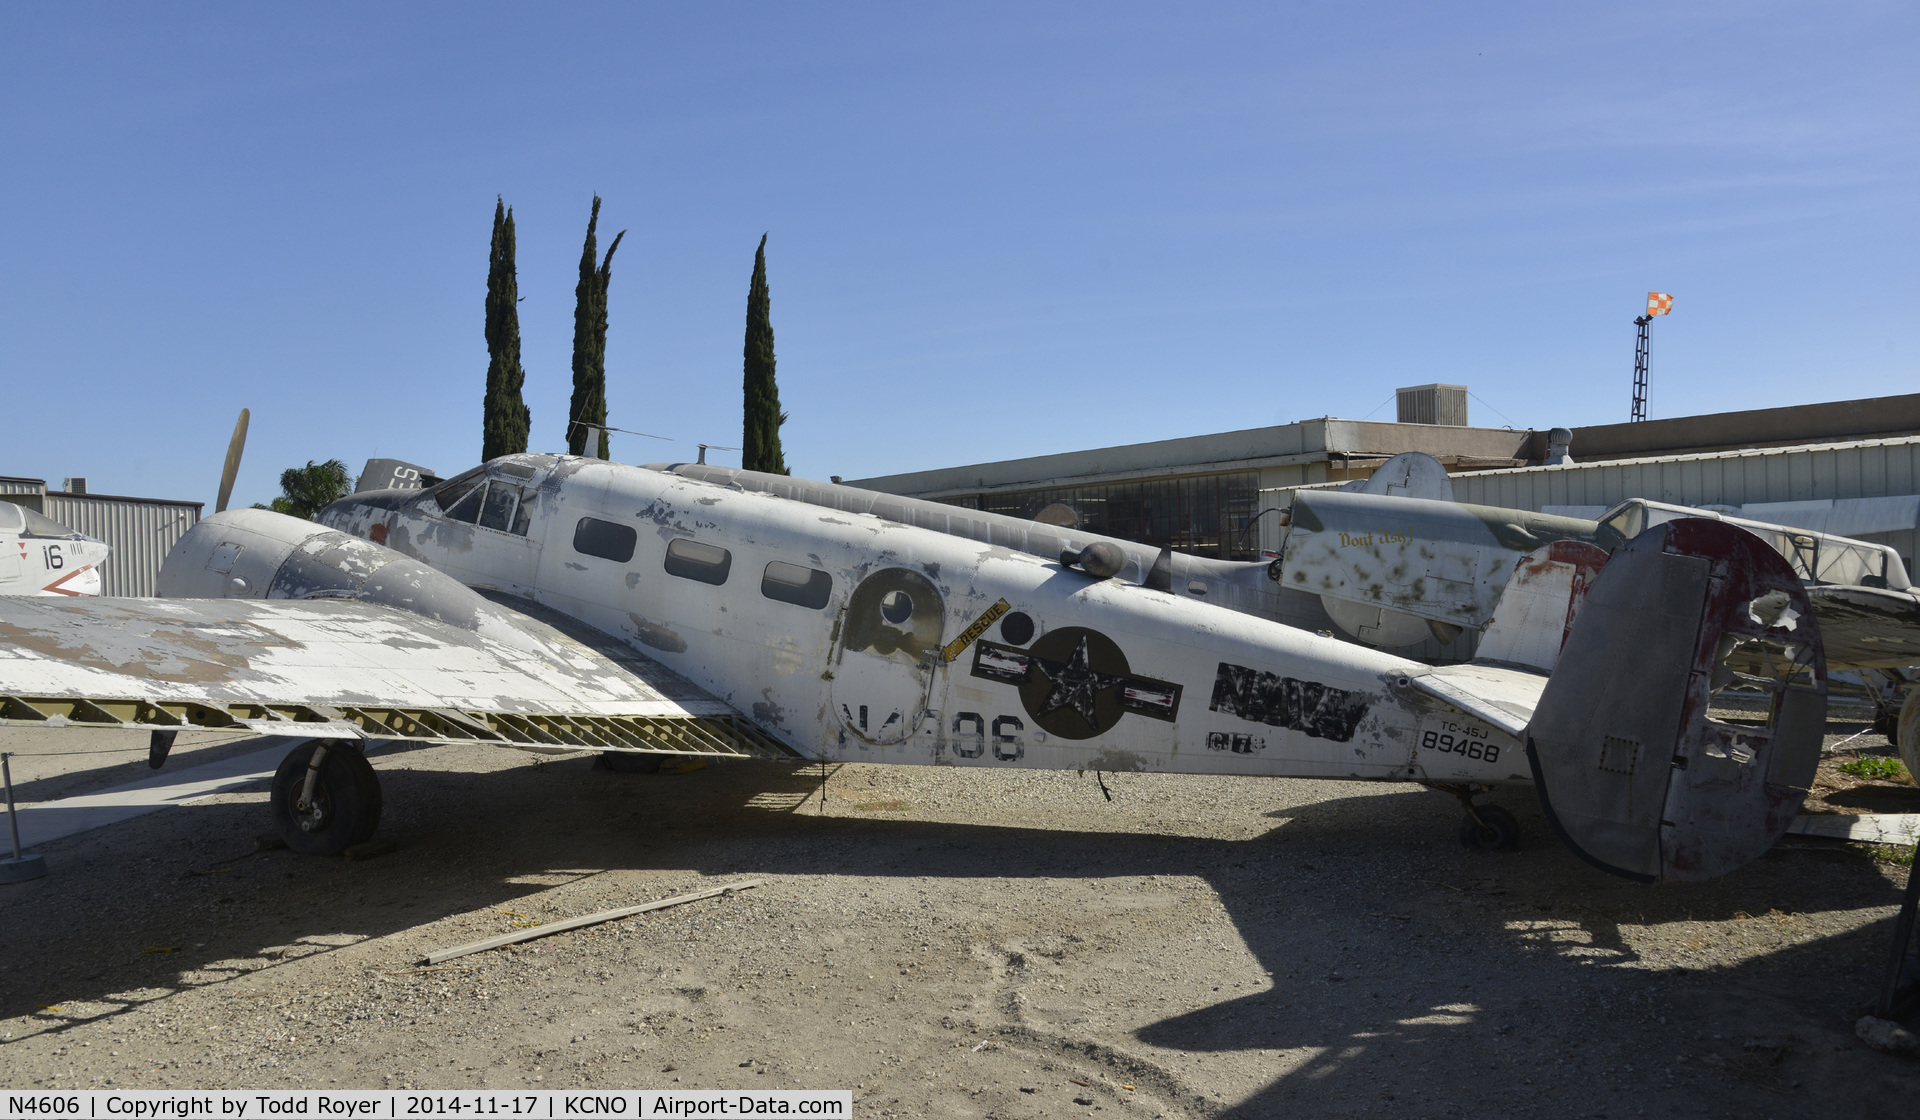 N4606, 1969 Beech C-45 C/N 89468, In Storage at the Planes of Fame Chino location